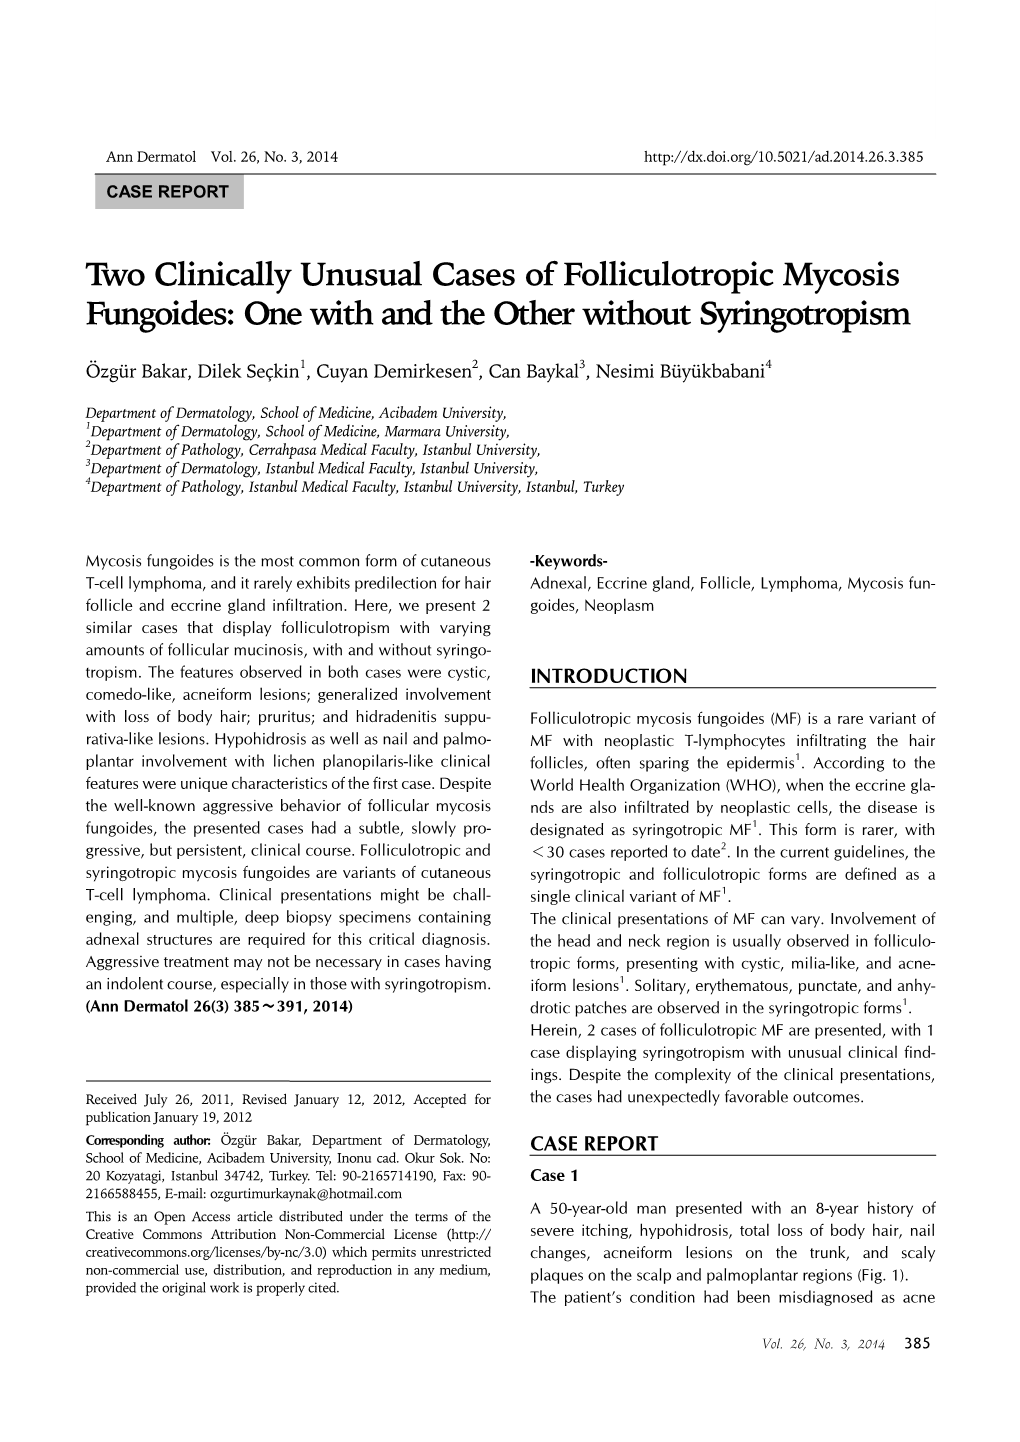 Two Clinically Unusual Cases of Folliculotropic Mycosis Fungoides: One with and the Other Without Syringotropism